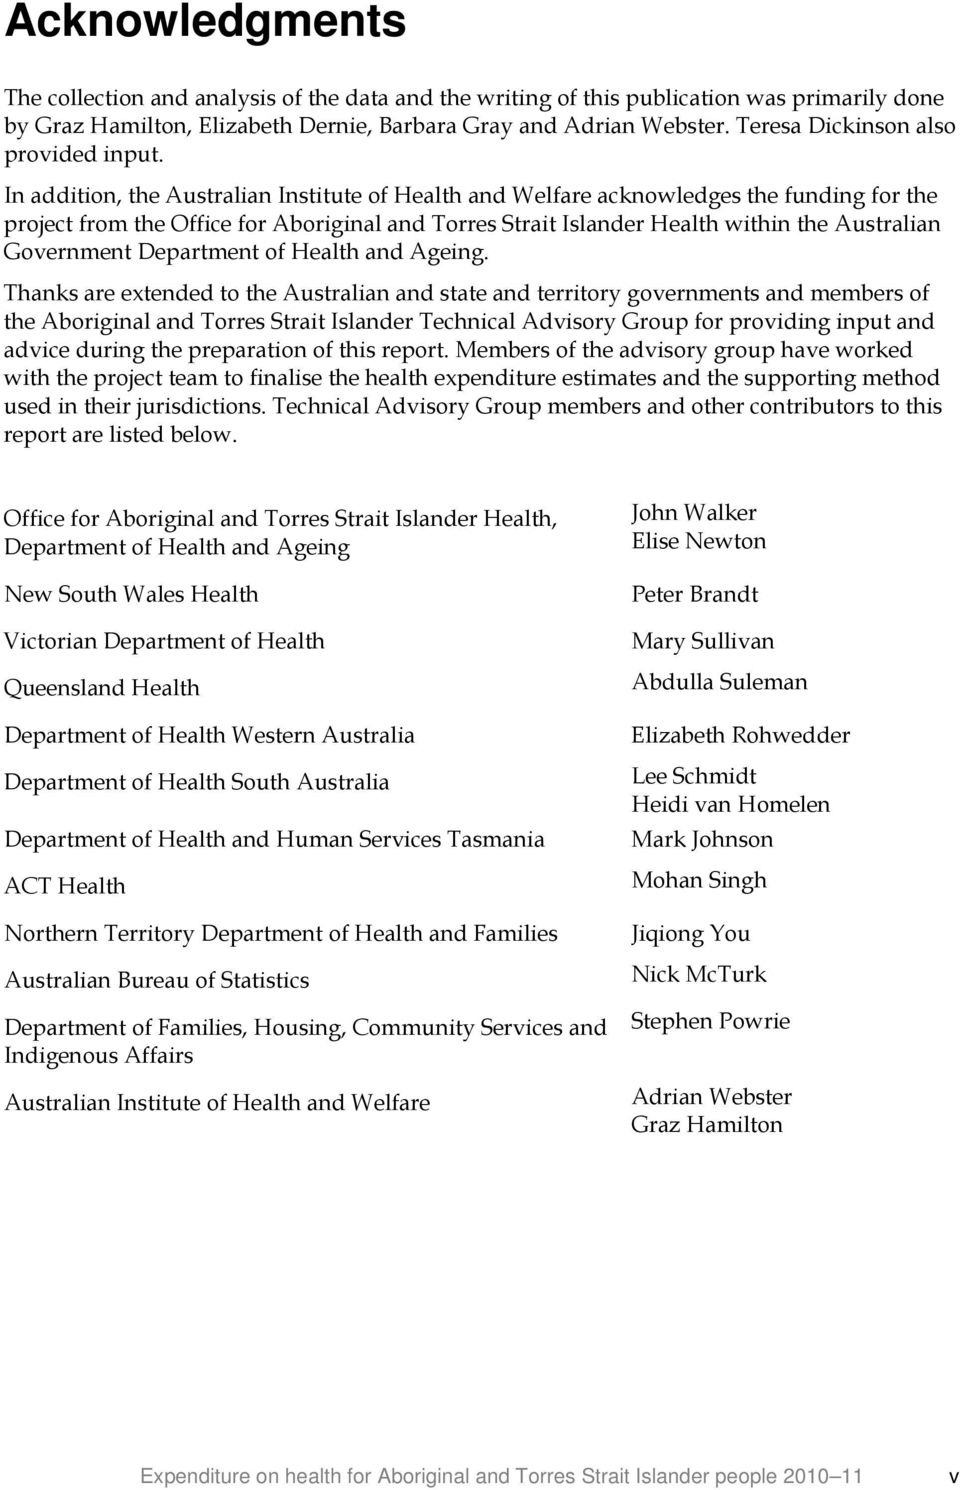 In addition, the Australian Institute of Health and Welfare acknowledges the funding for the project from the Office for Aboriginal and Torres Strait Islander Health within the Australian Government